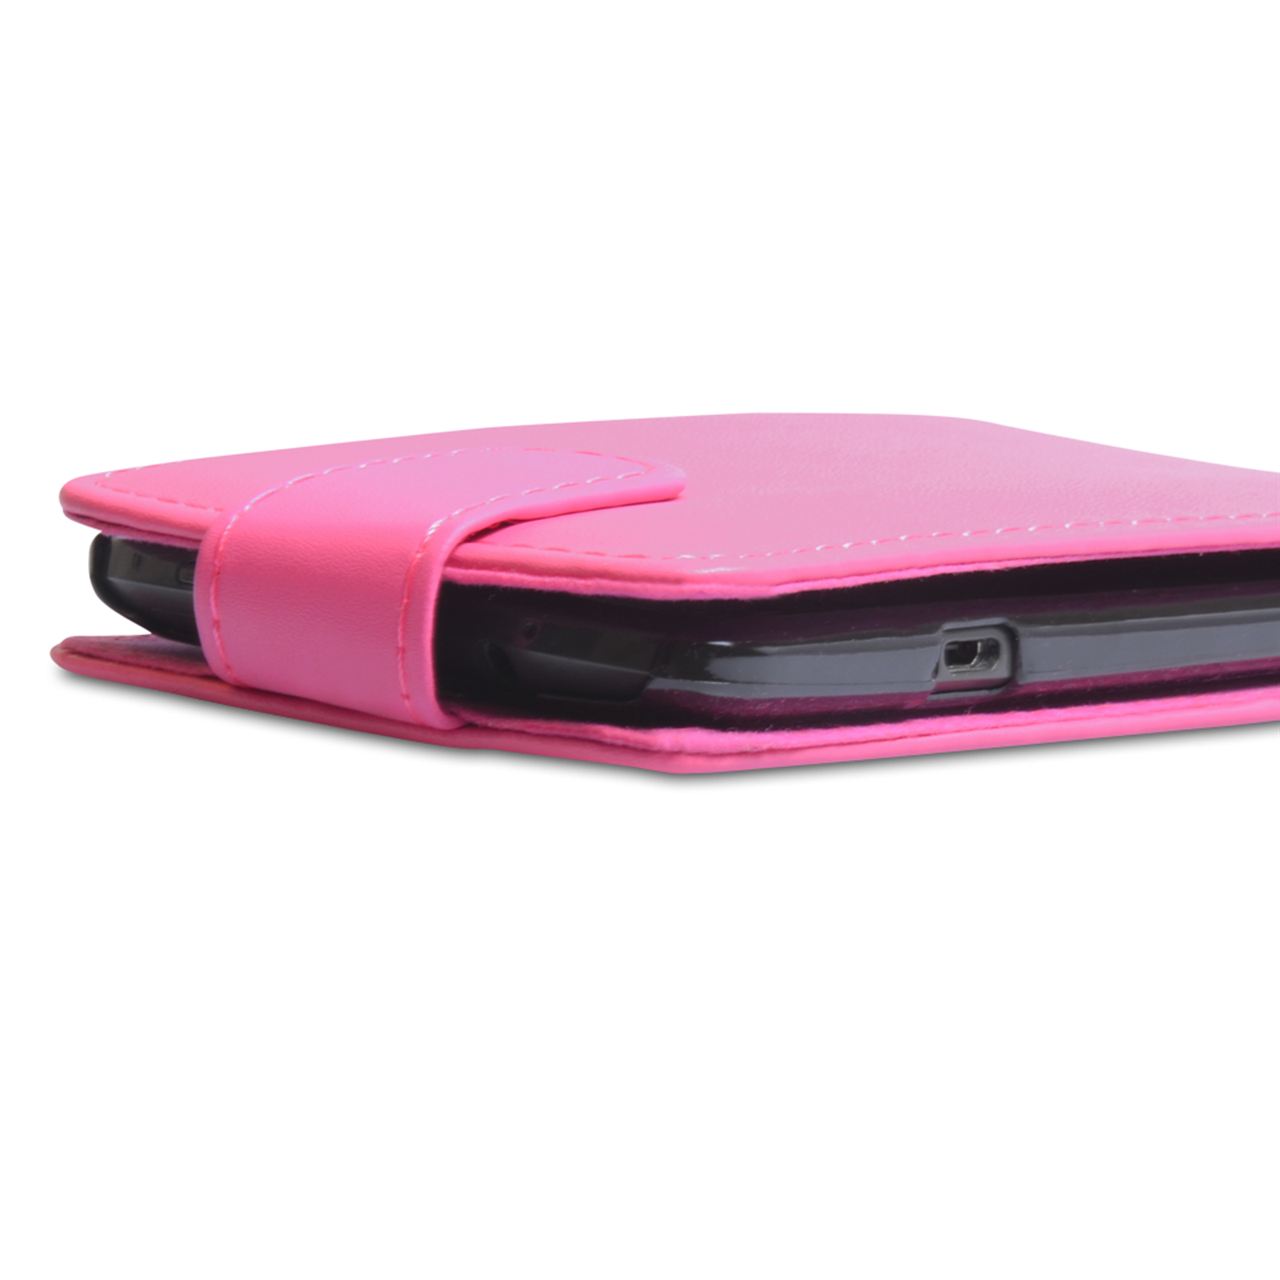 YouSave Accessories HTC One X Leather-Effect Flip Case - Hot Pink